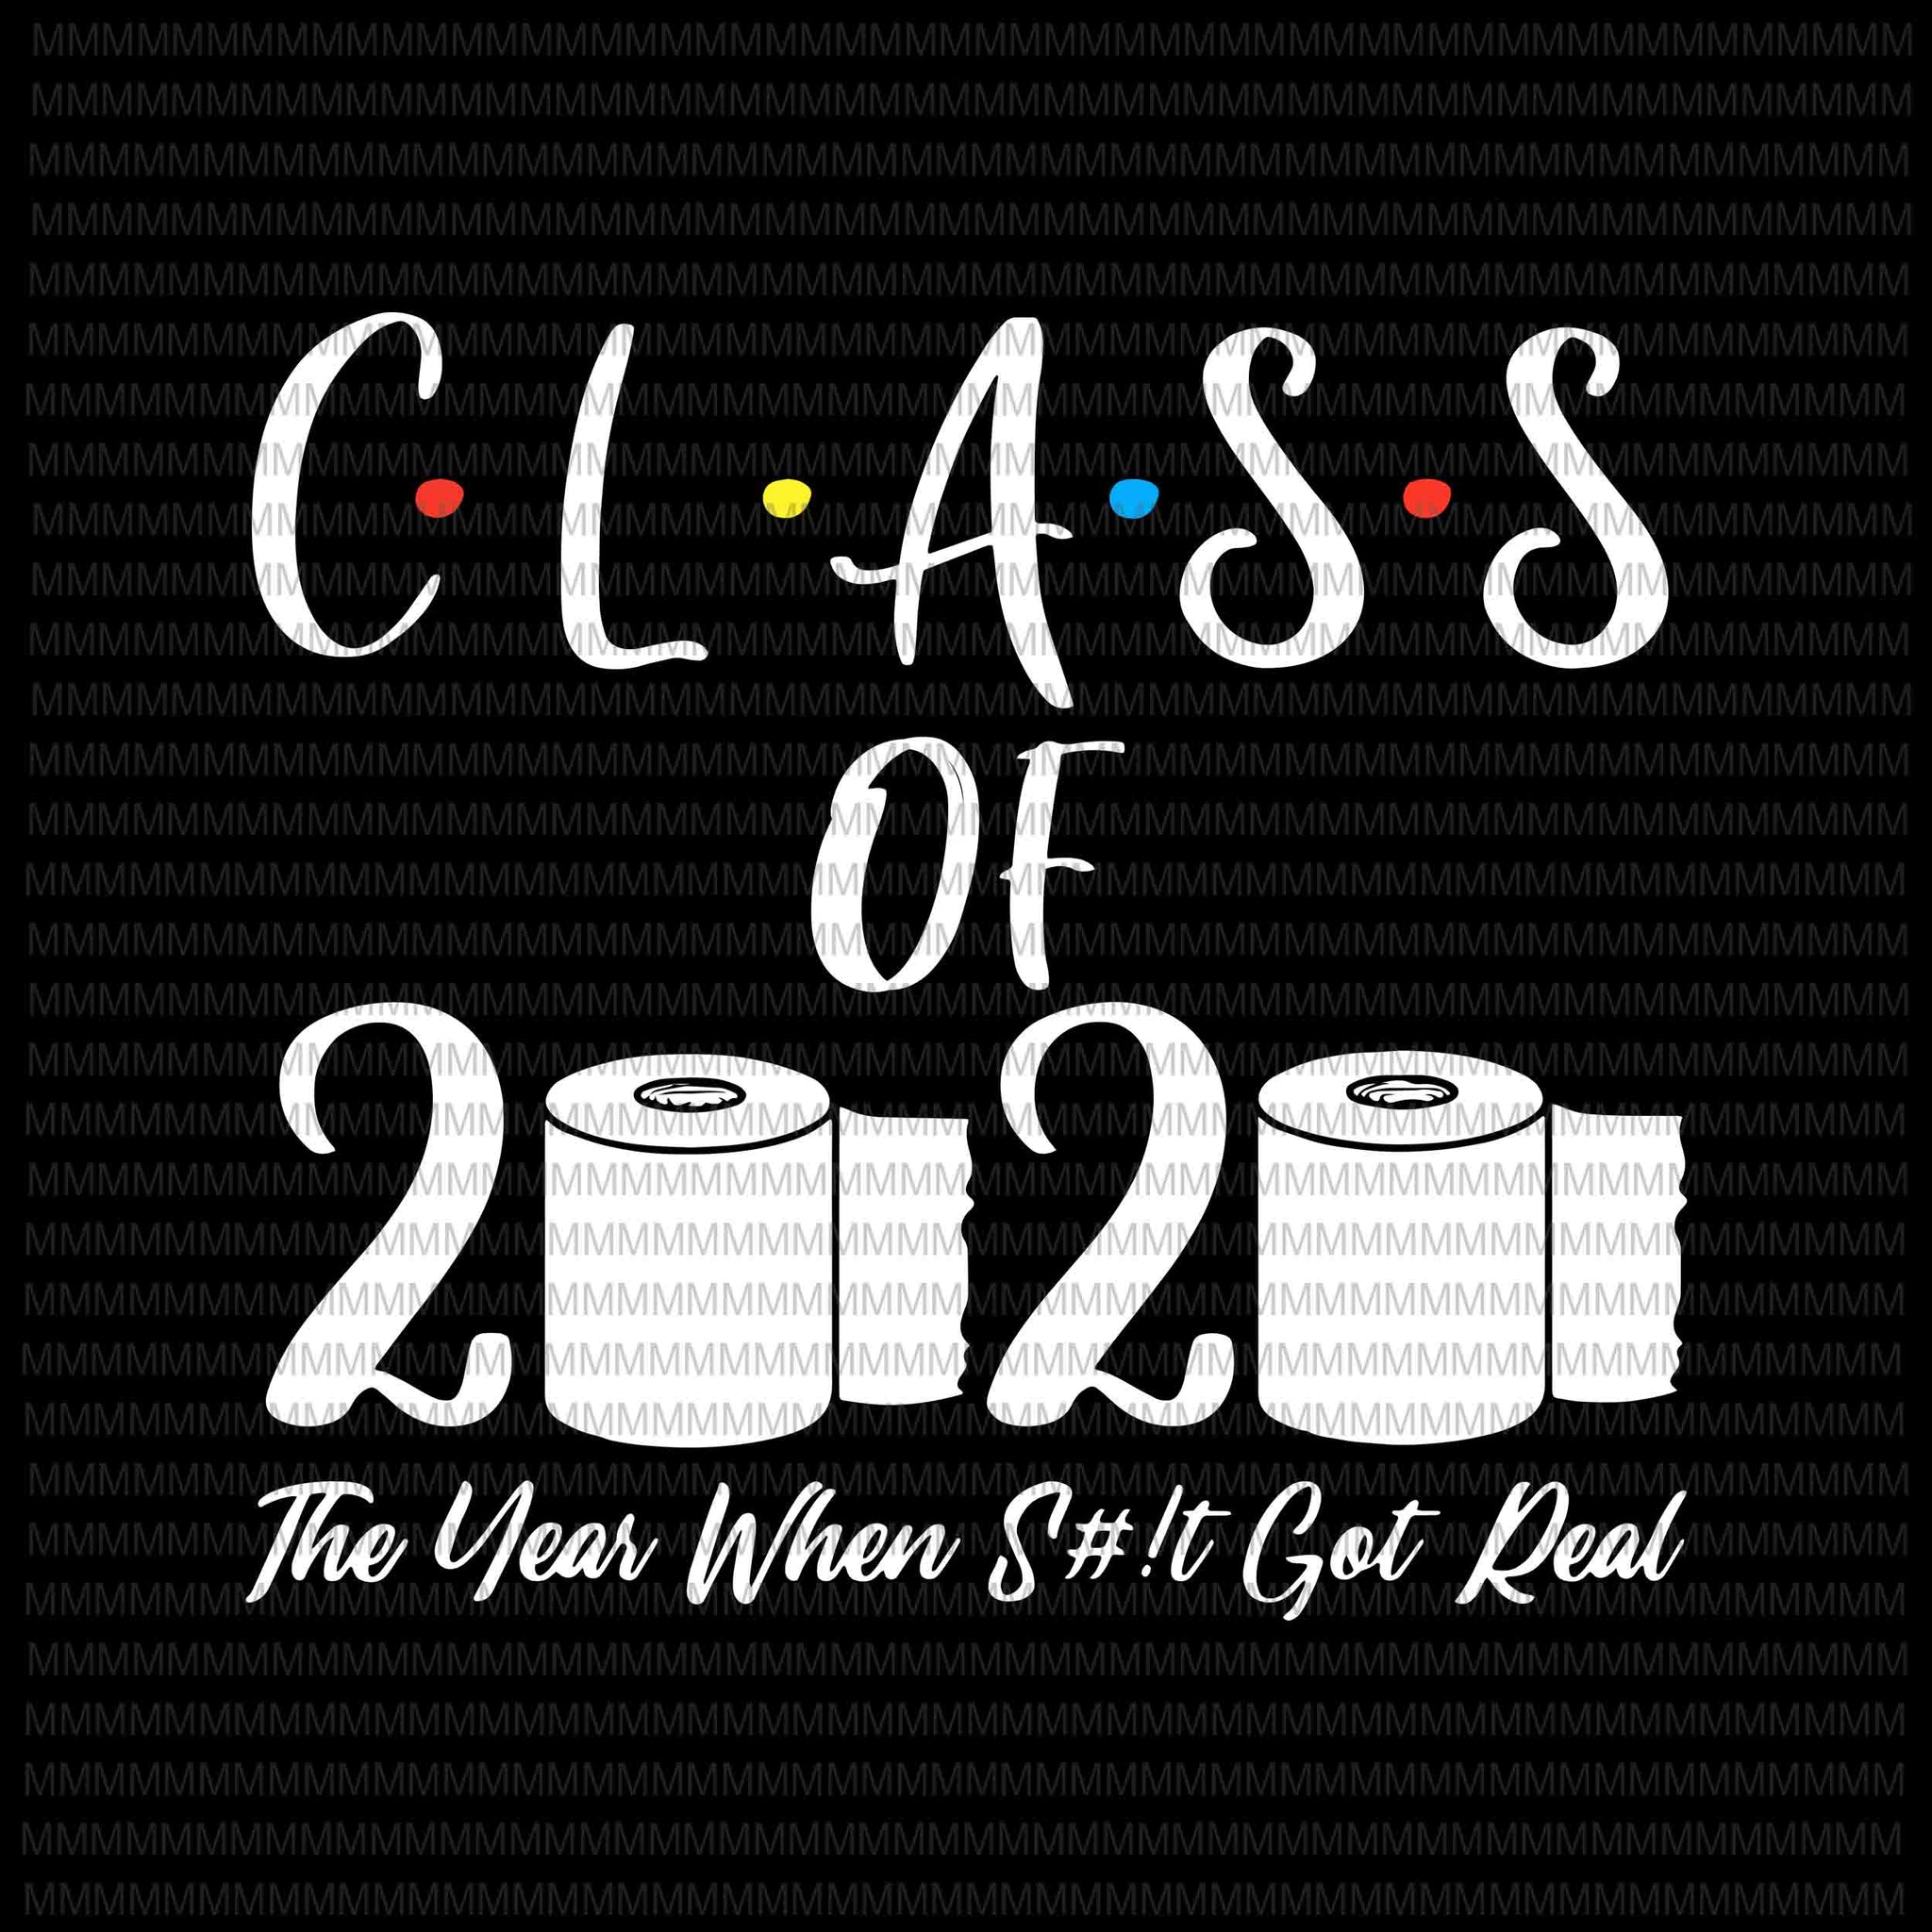 Class of 2020 The Year When Shit Got Real, 2020 TP Apocalypse, Class of 2020, Graduation funny quote commercial use t-shirt design